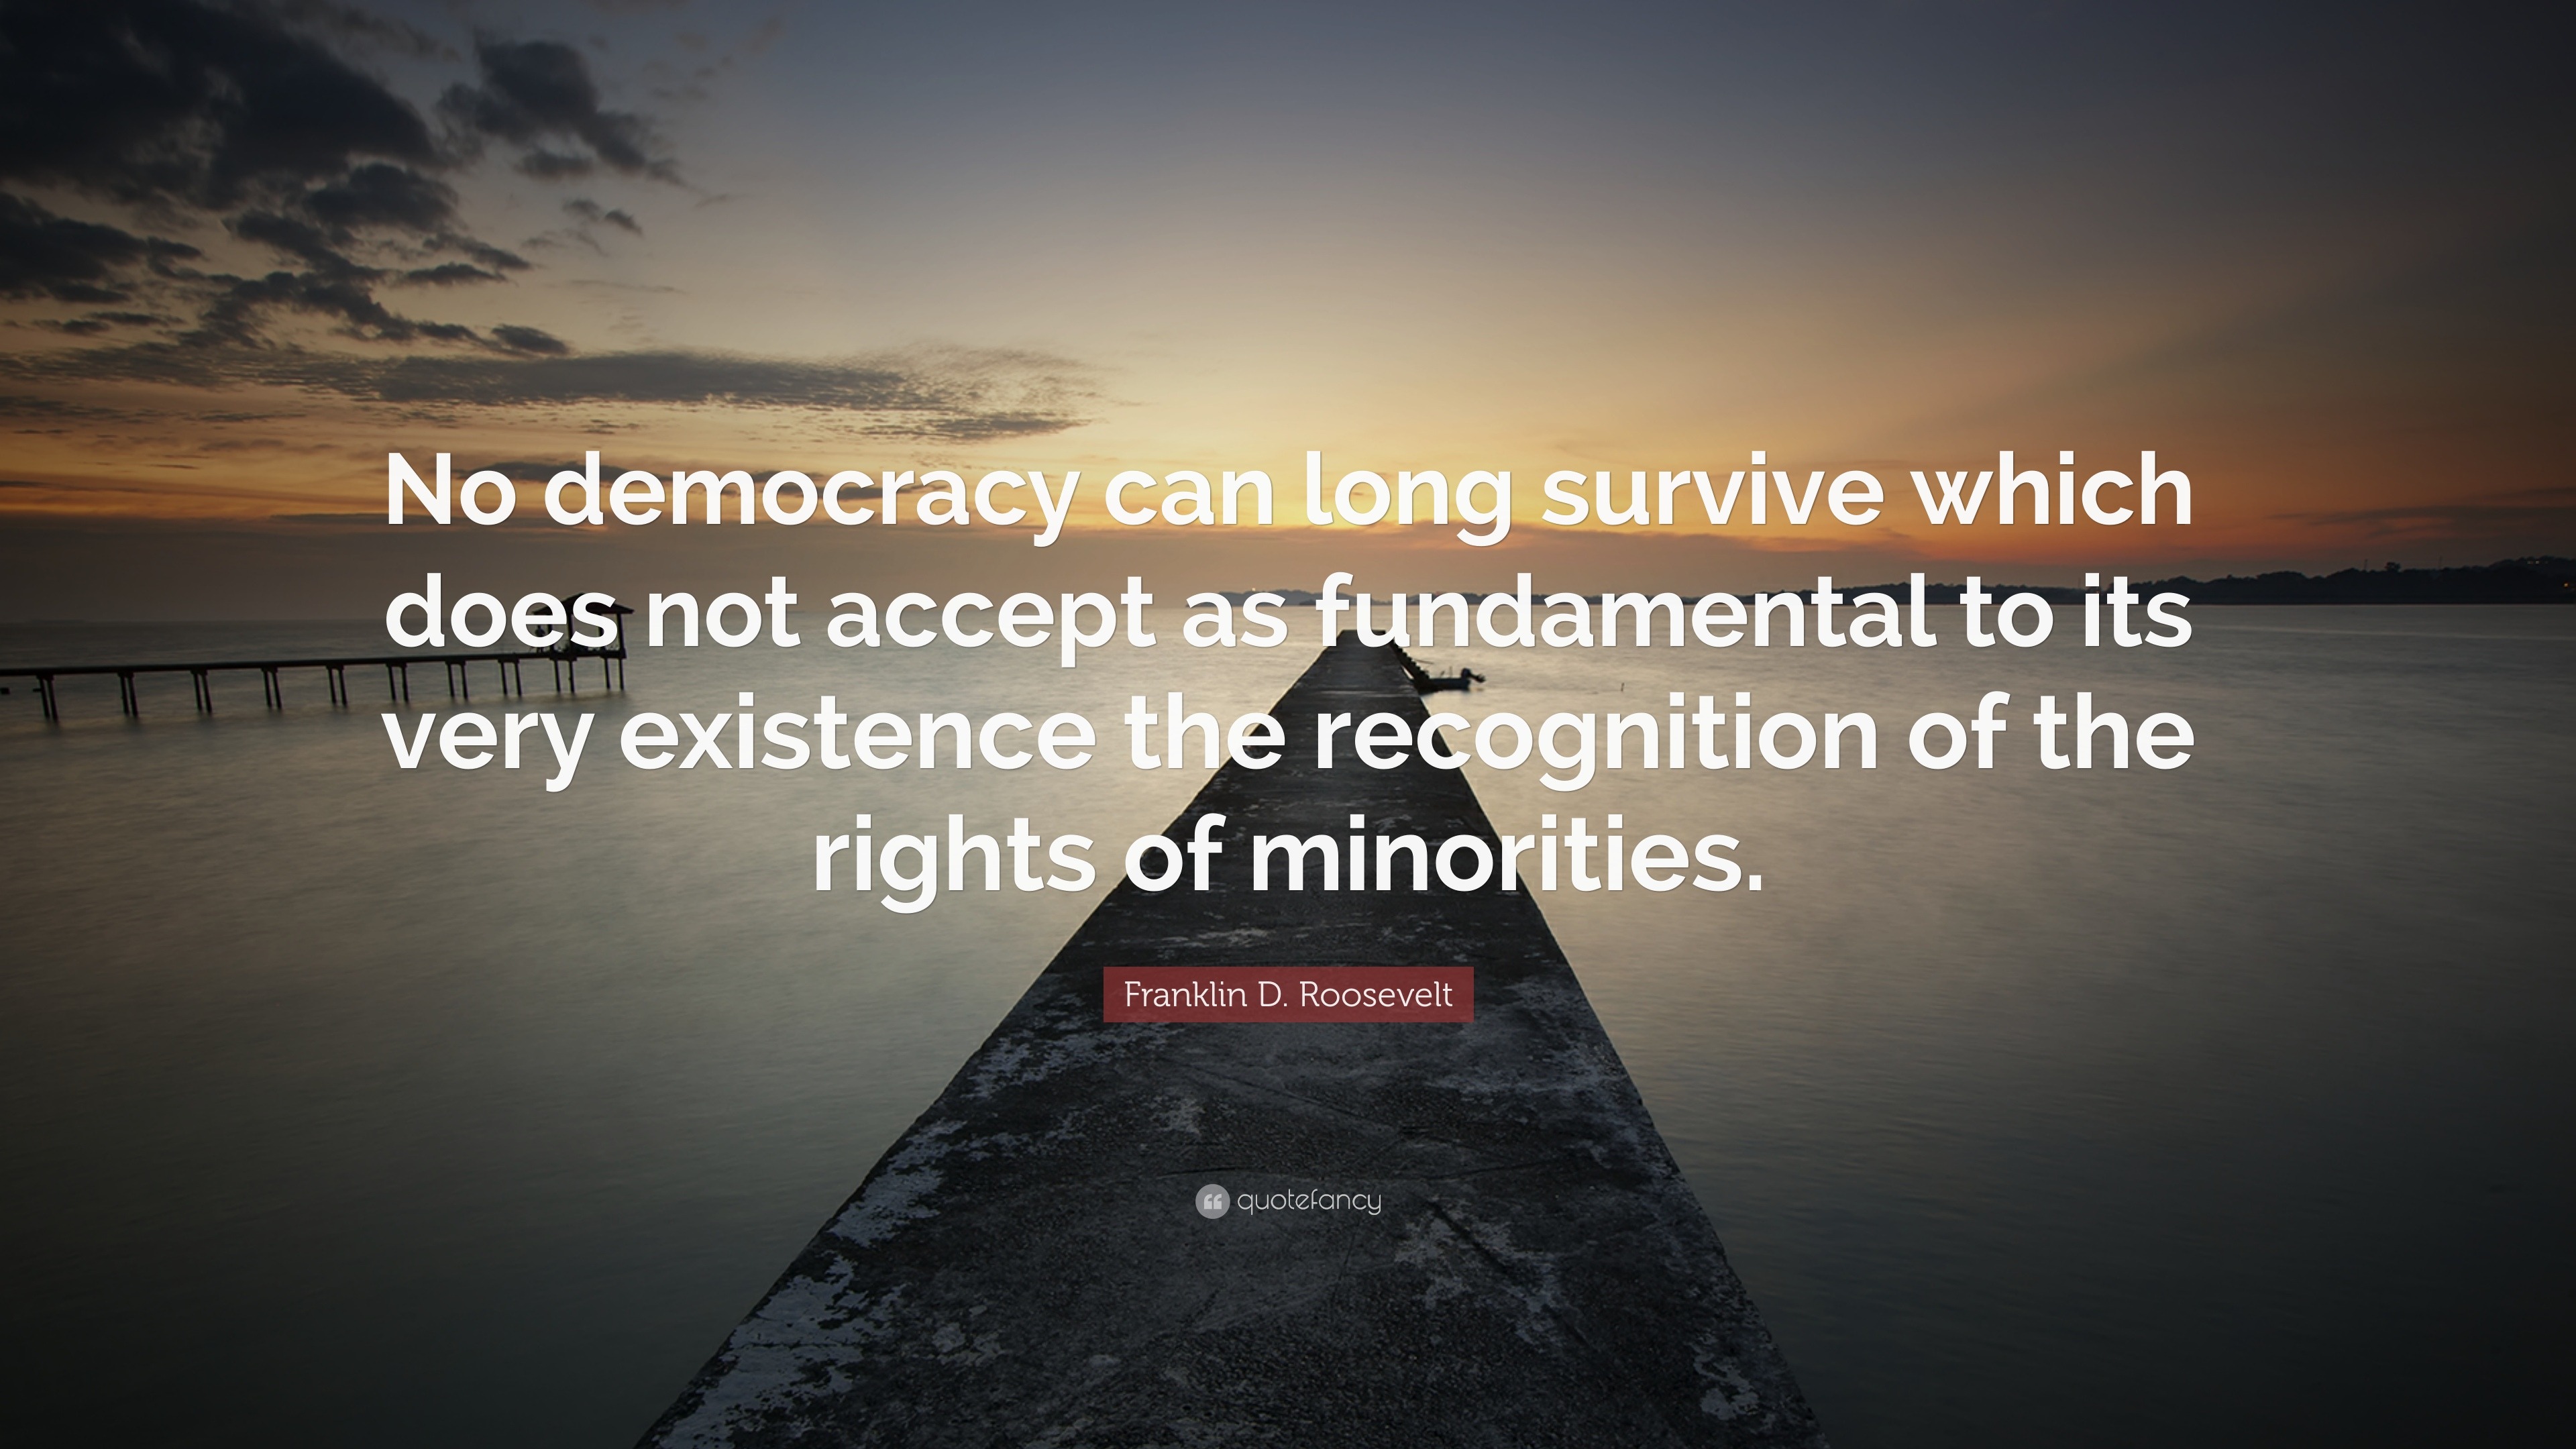 Franklin D. Roosevelt Quote: "No democracy can long ...